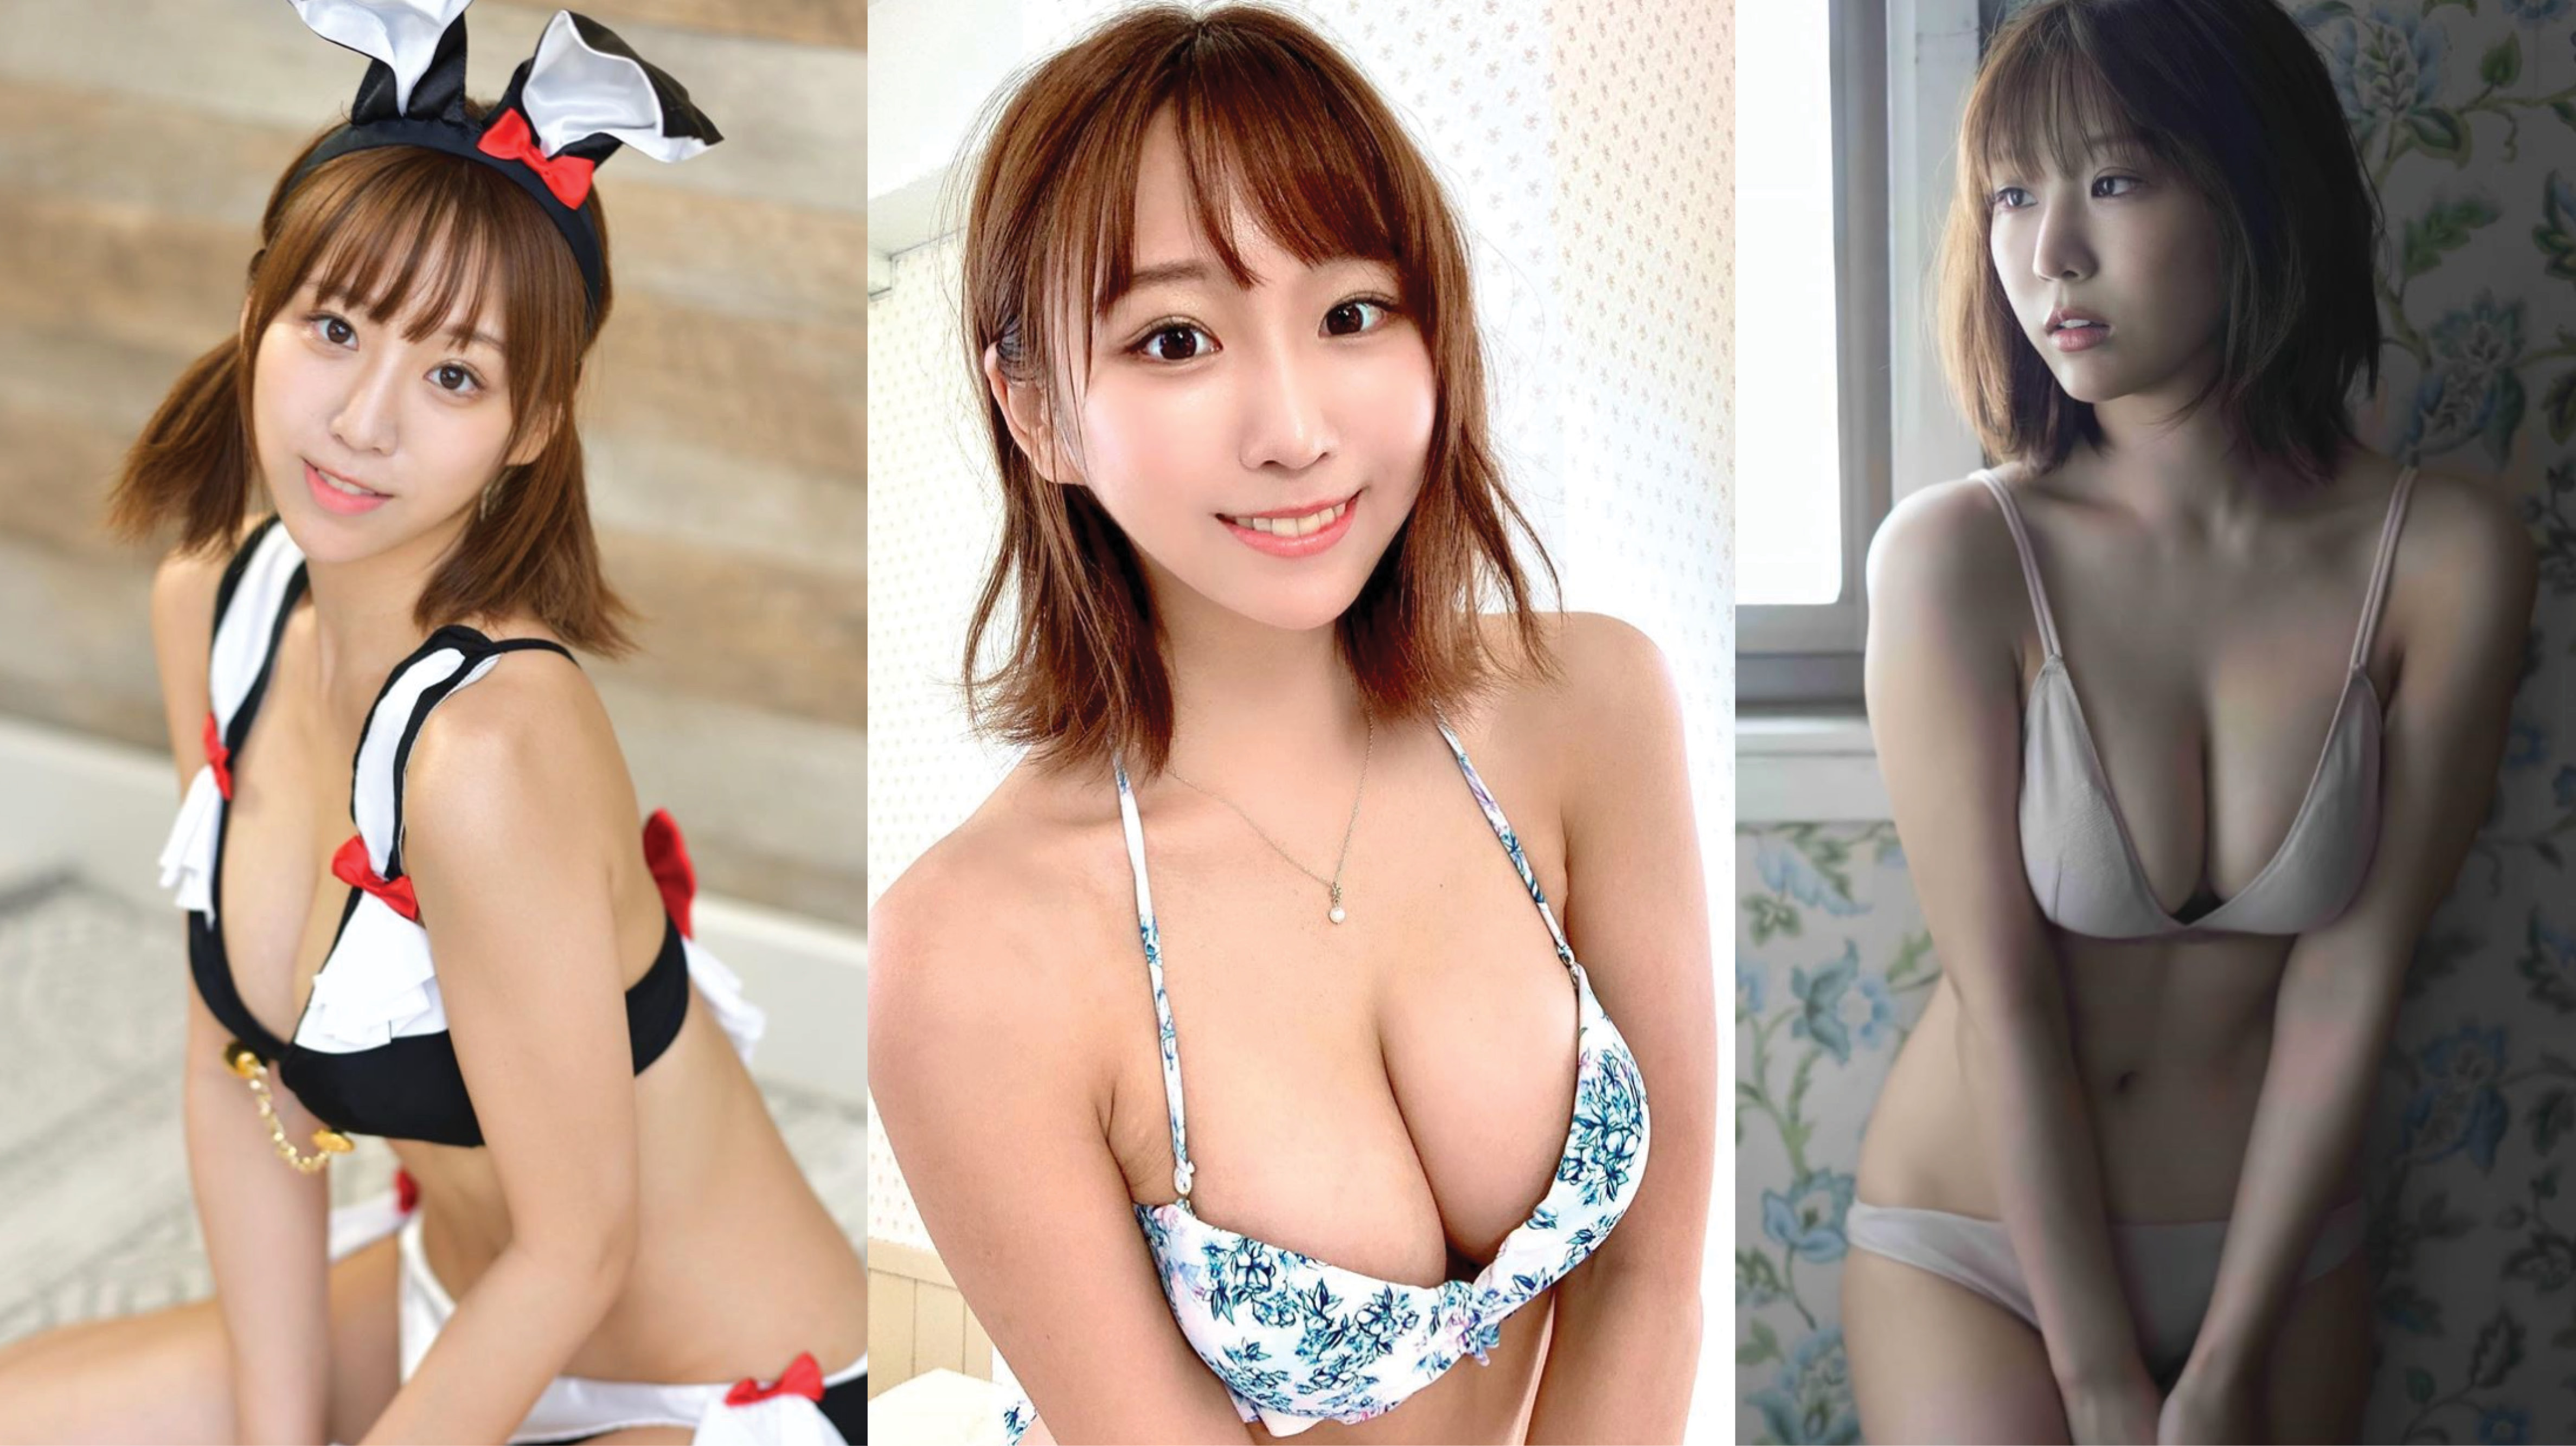 The VMX Gravure Model Discovery Series: Hinata Aoi